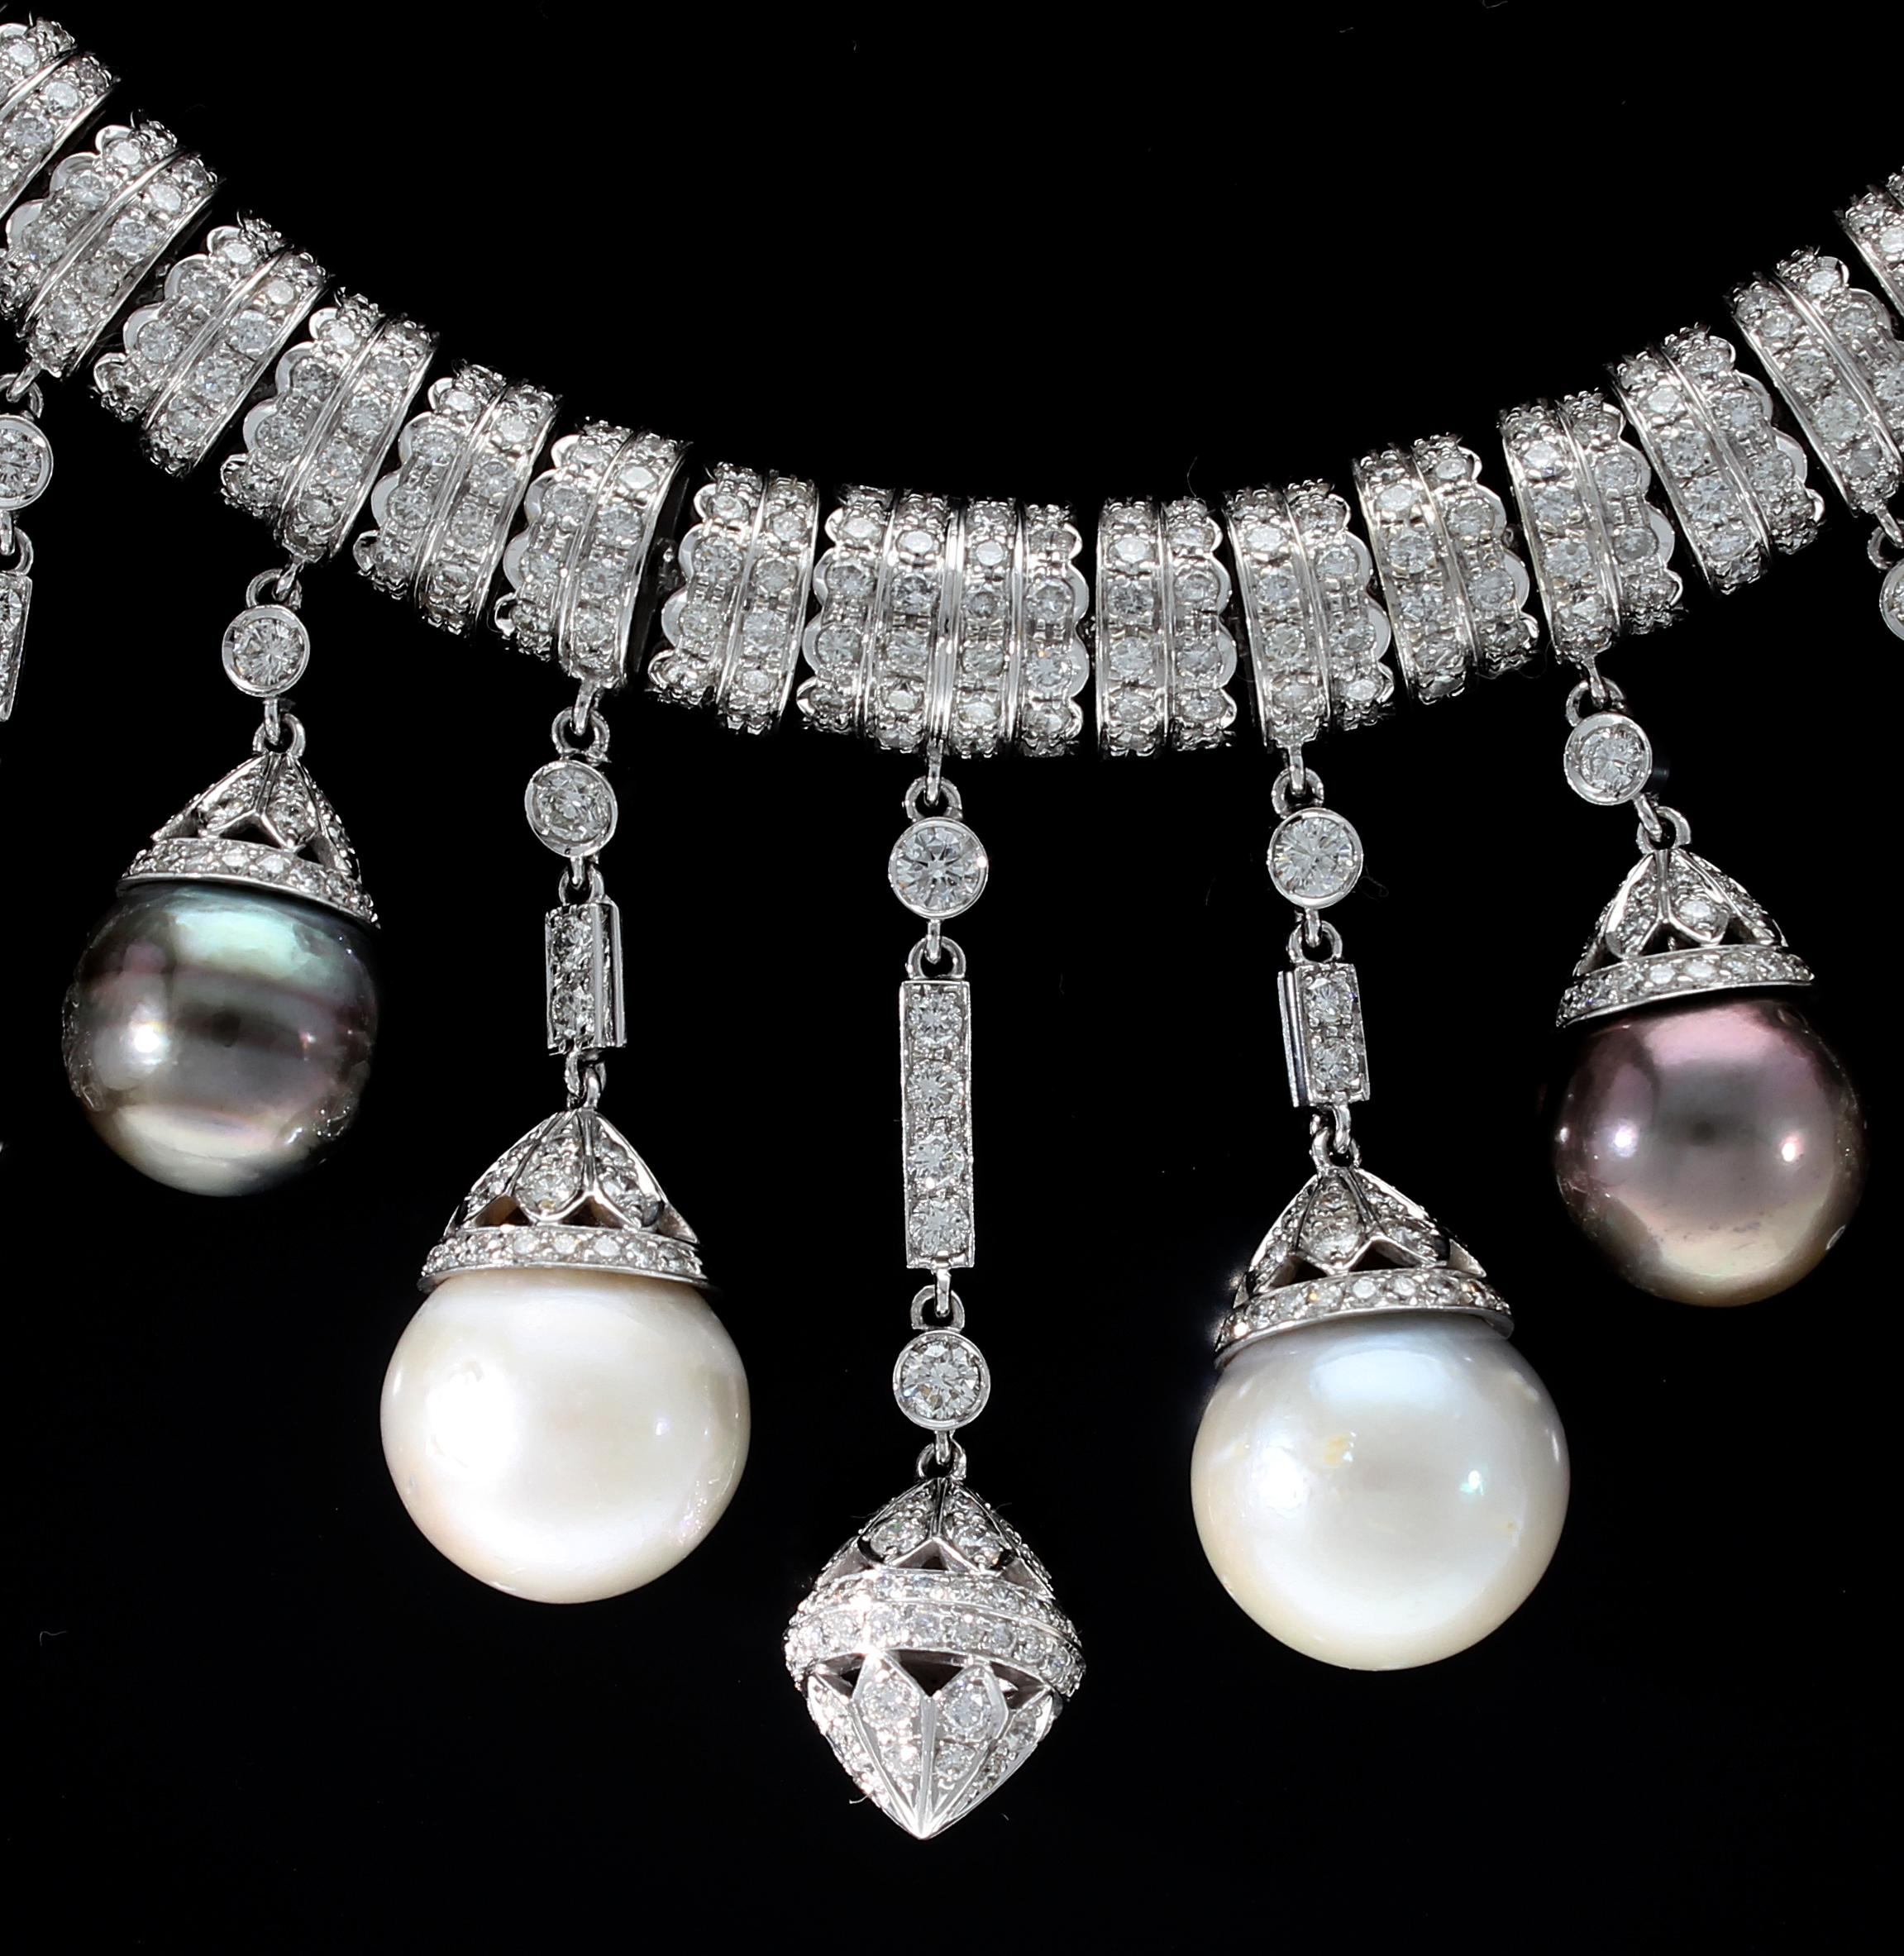 Necklace White Gold and Diamonds, Pendants with White and Black Pearls S.S. In New Condition For Sale In Rome, IT